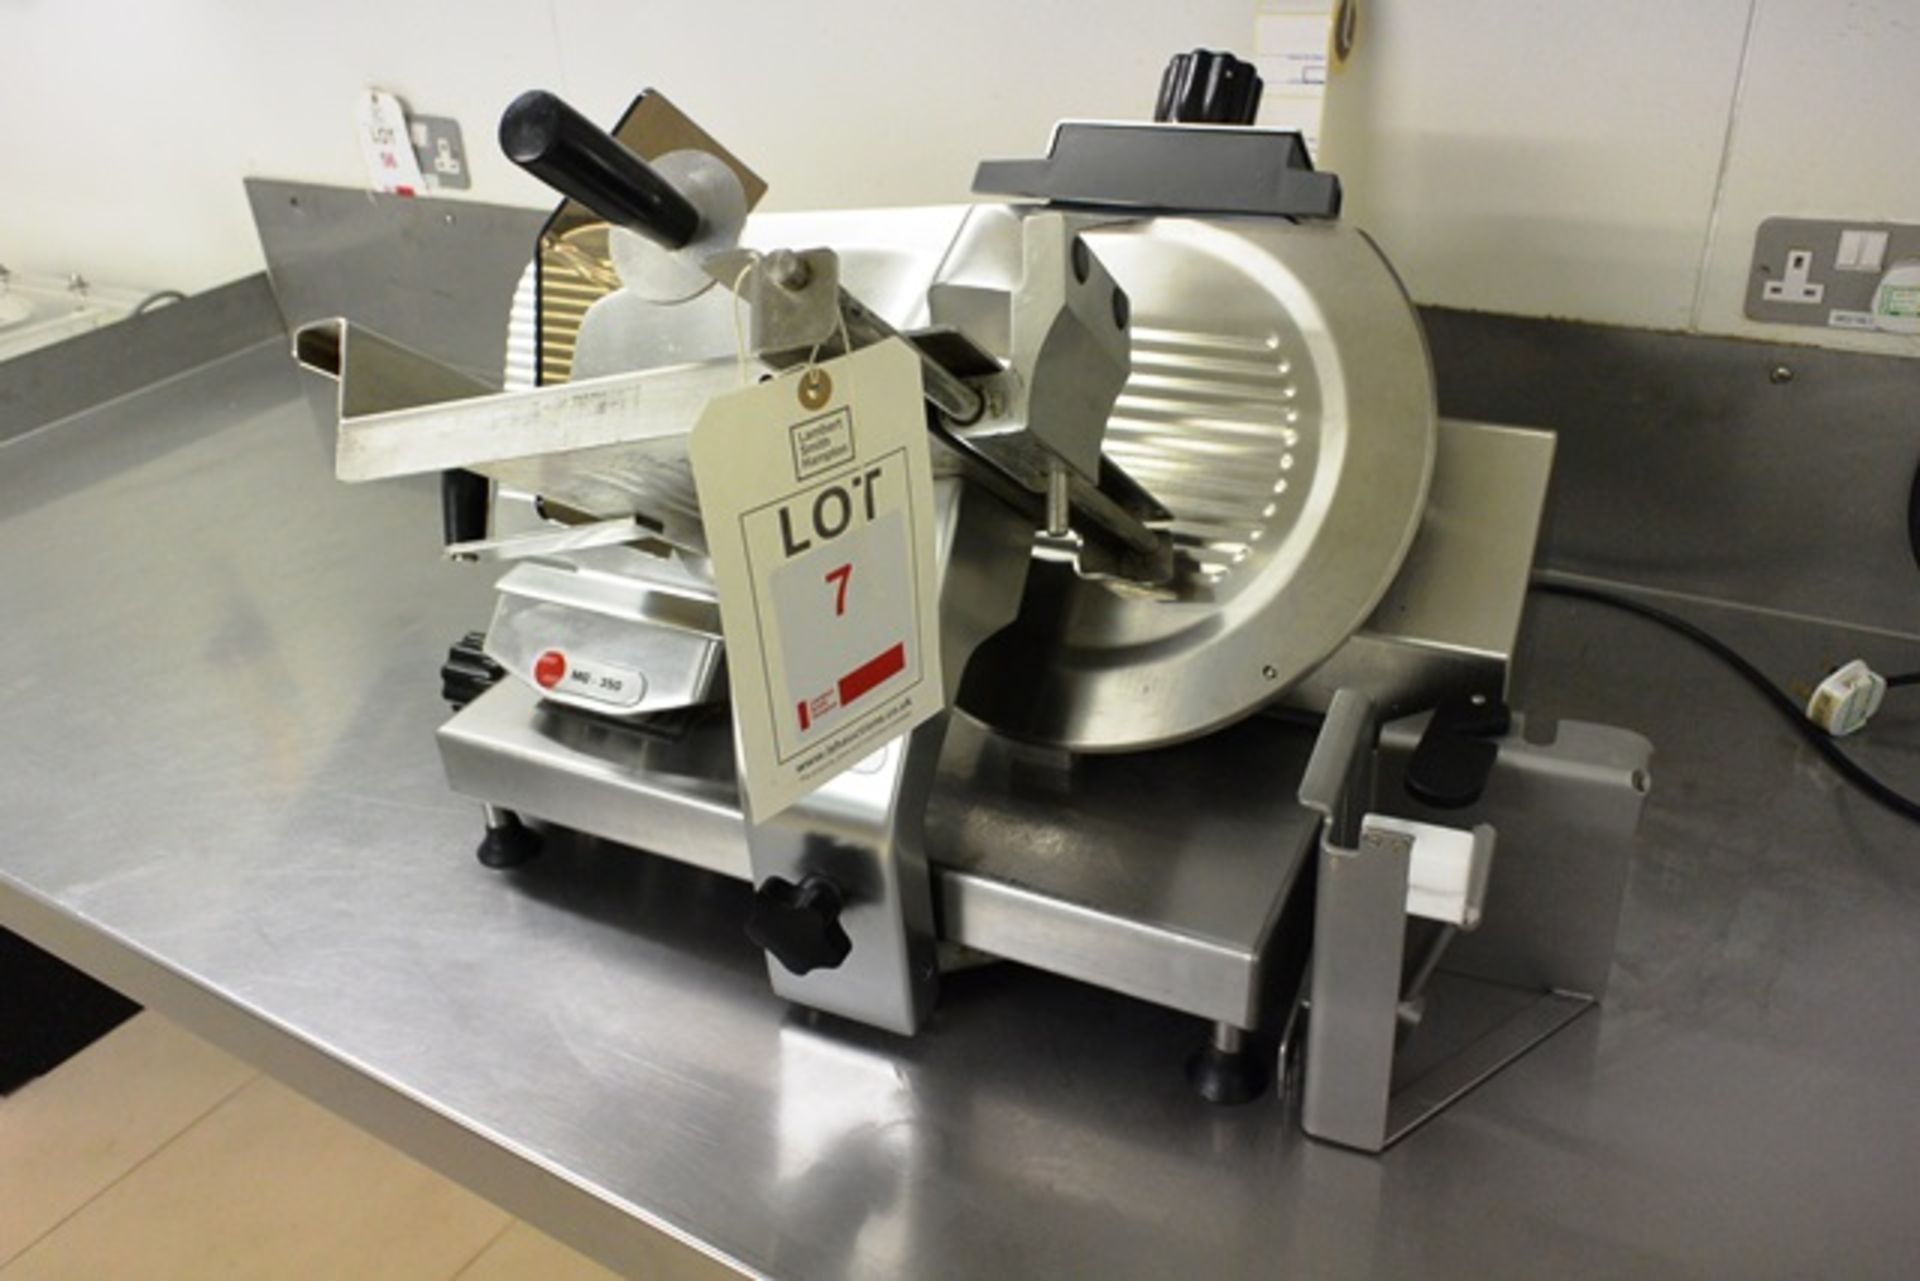 MG 350 stainless steel bench top meat slicer, 240v